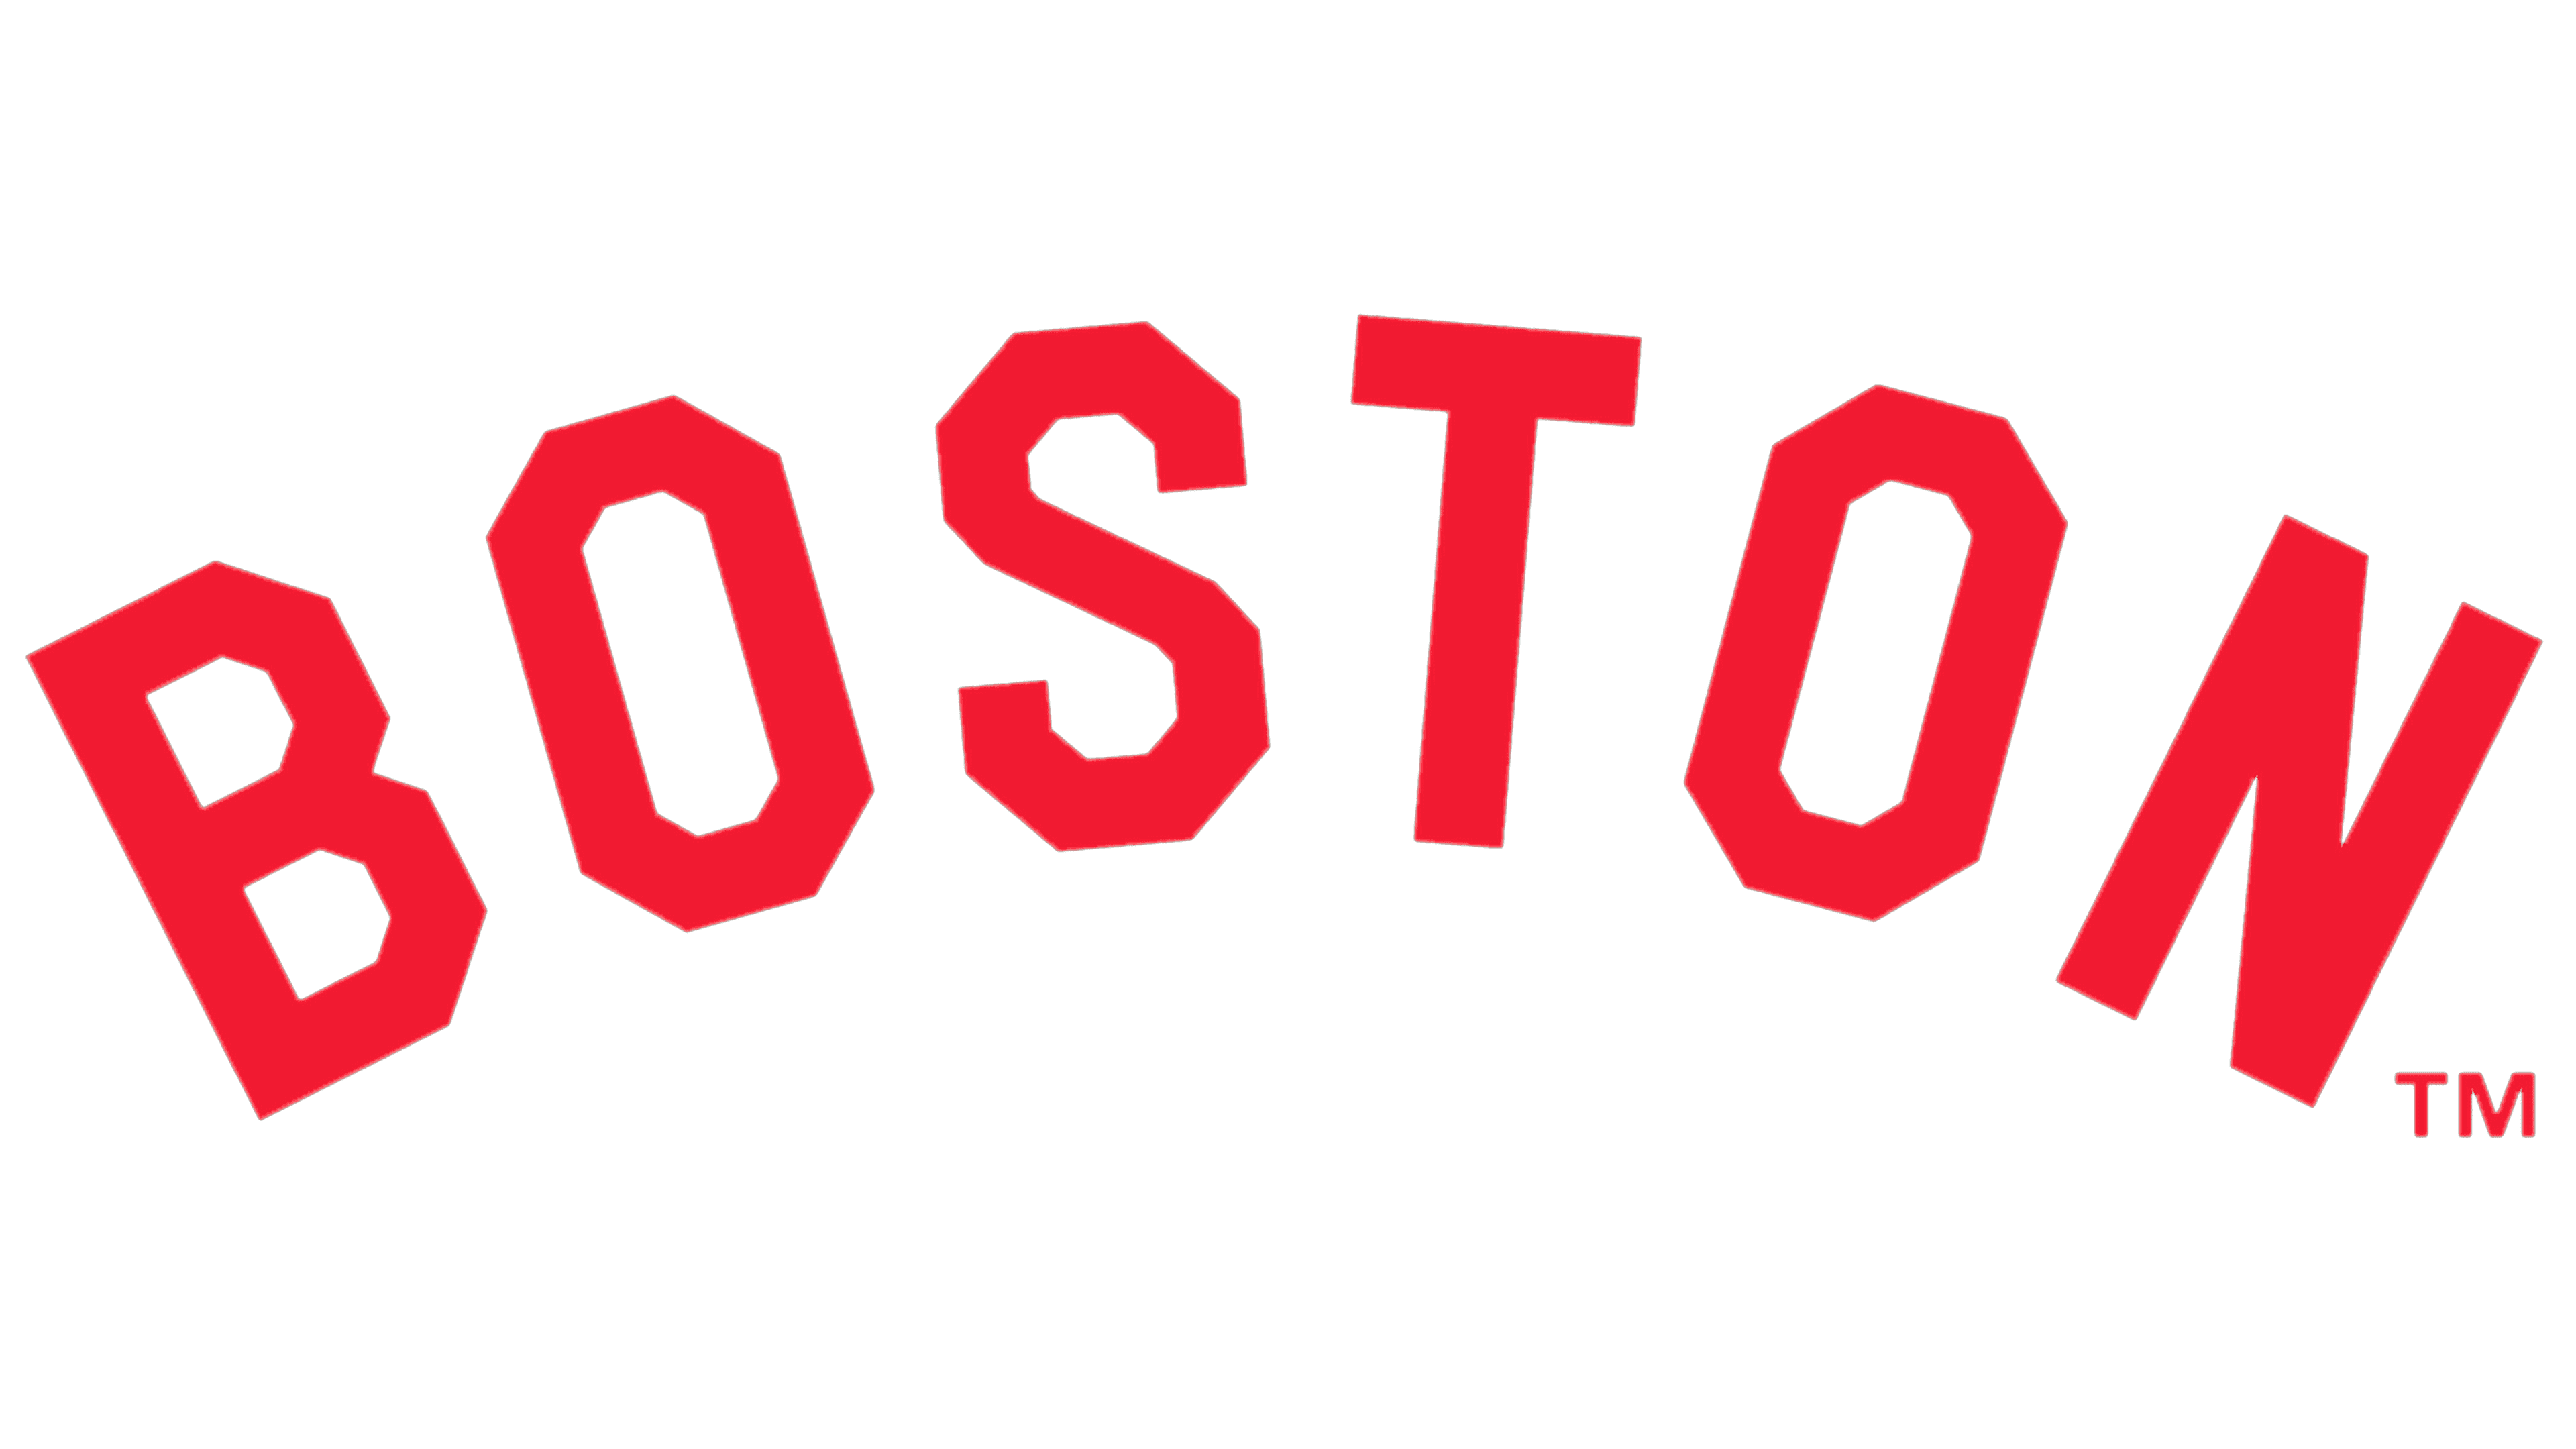 boston-red-sox-logo-png-the-red-sox-compete-in-major-league-baseball